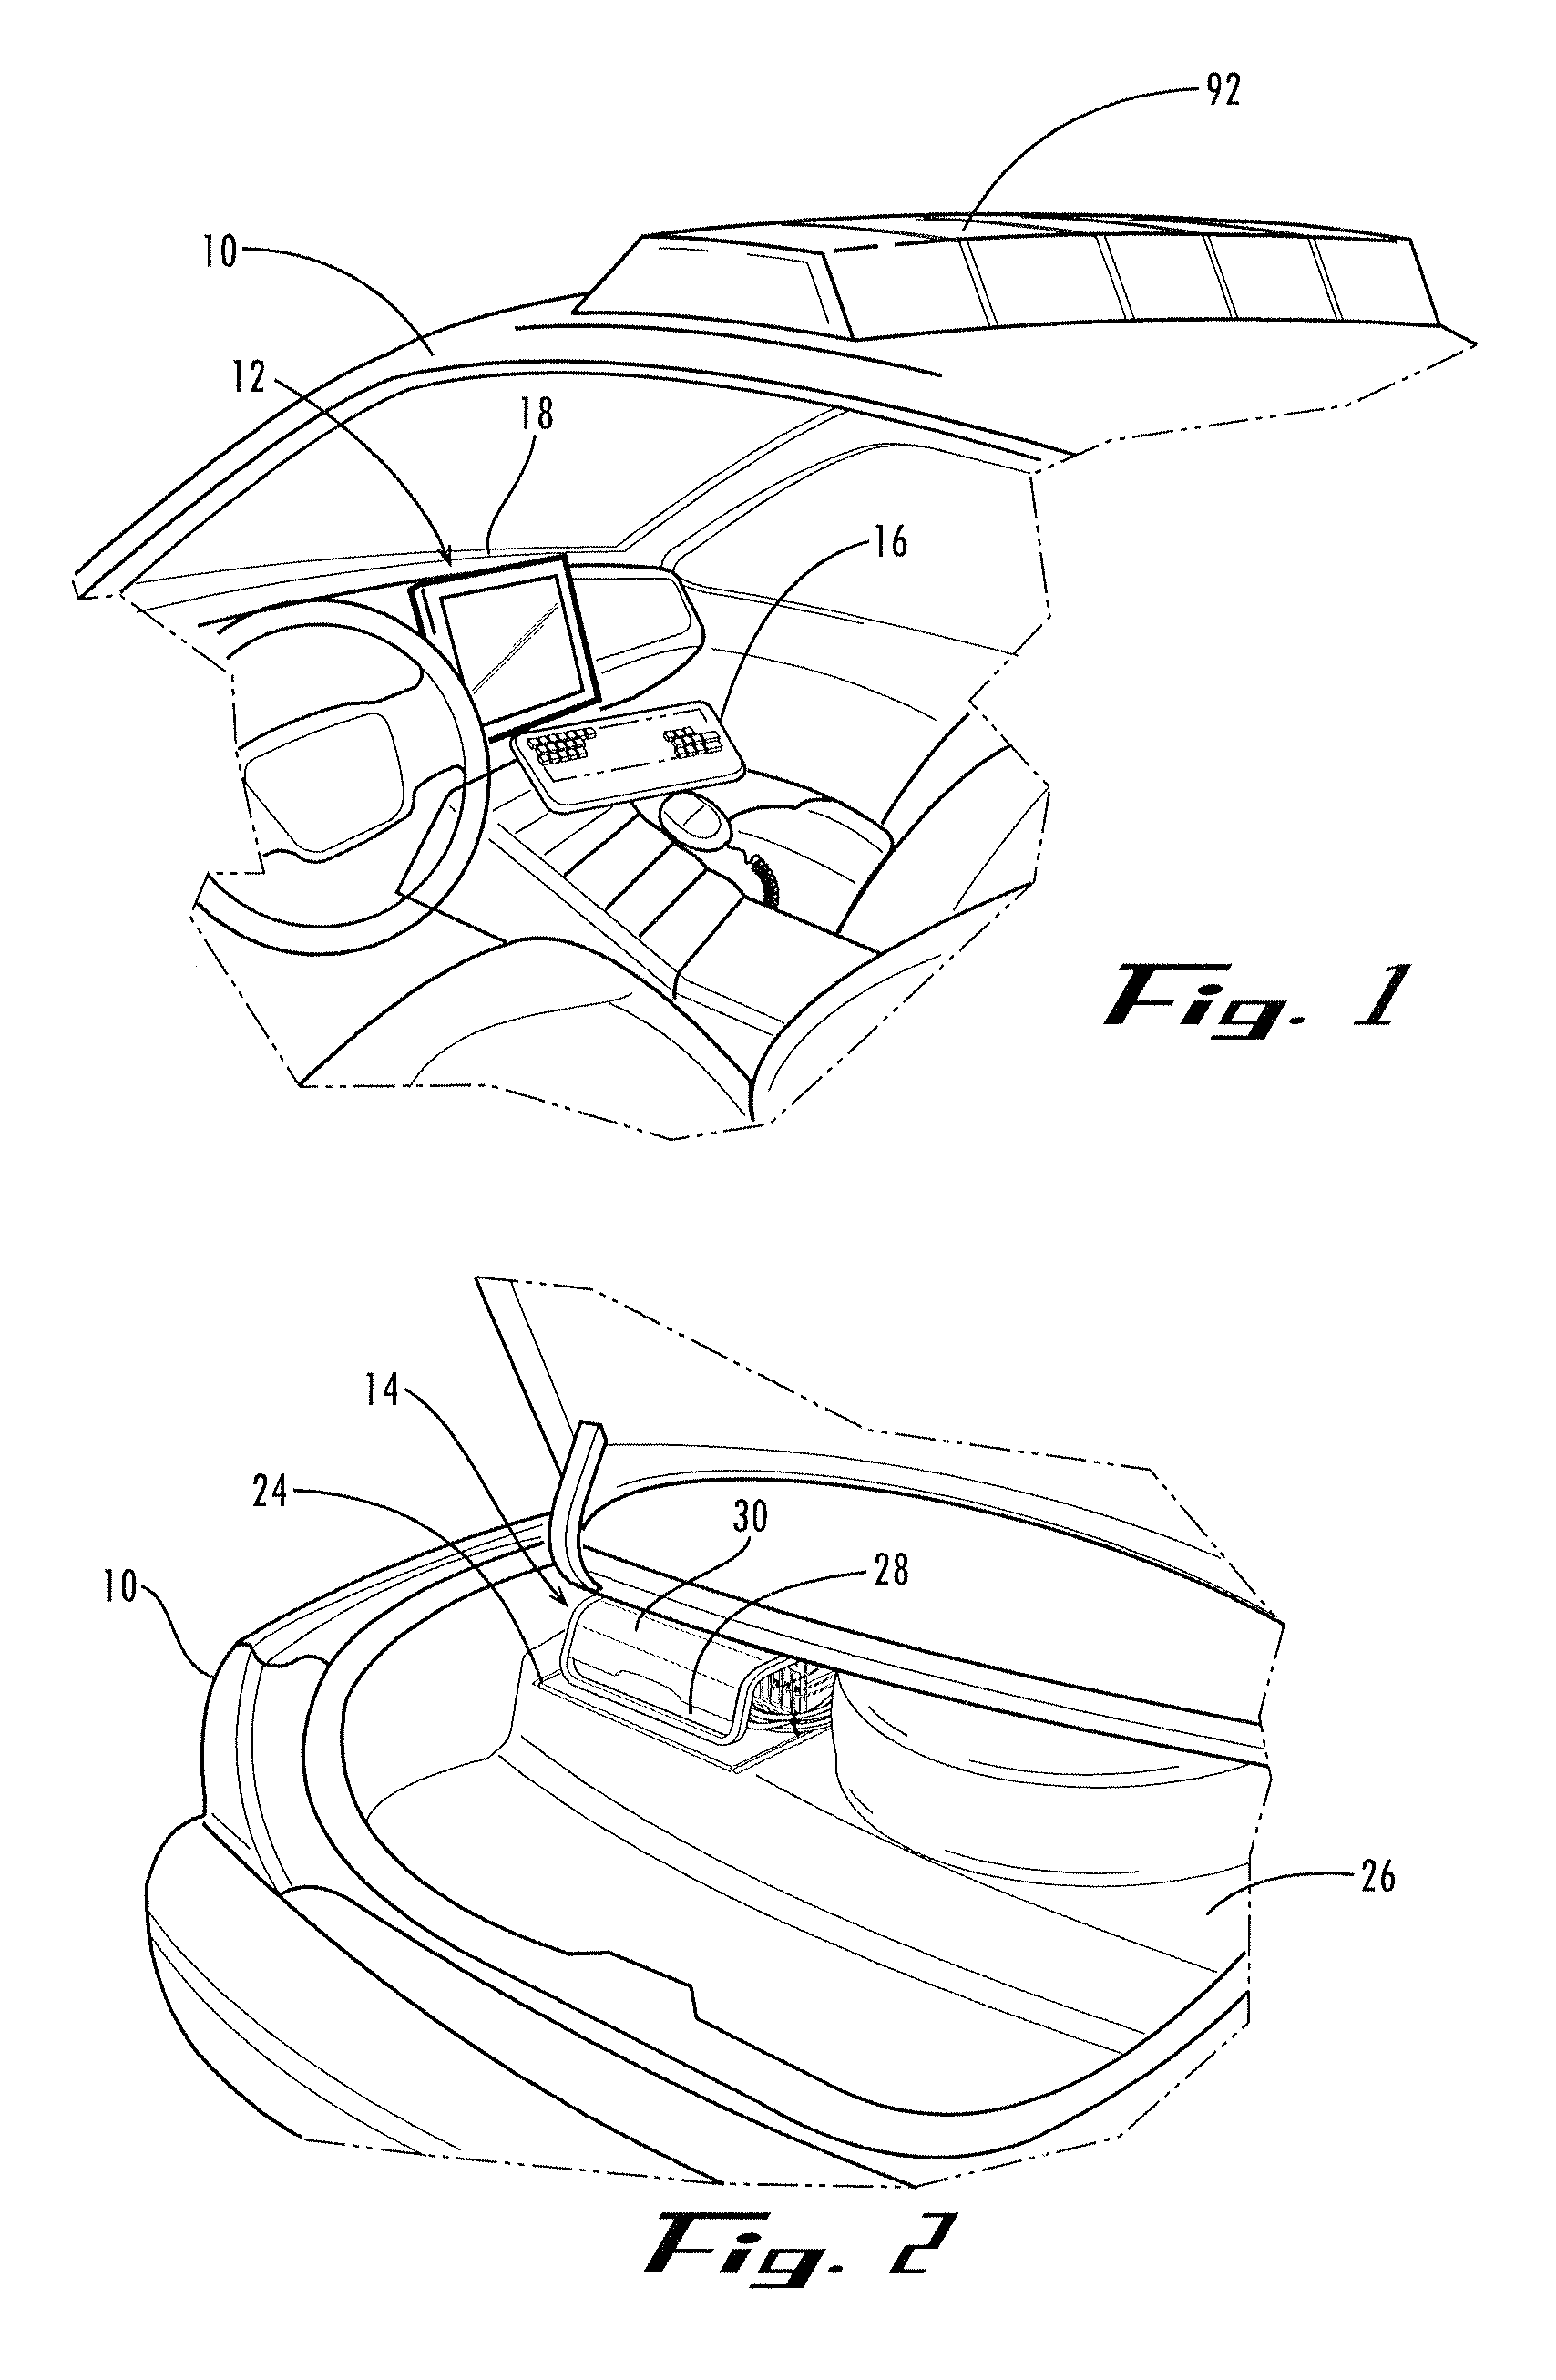 Mobile computing device with modular expansion features